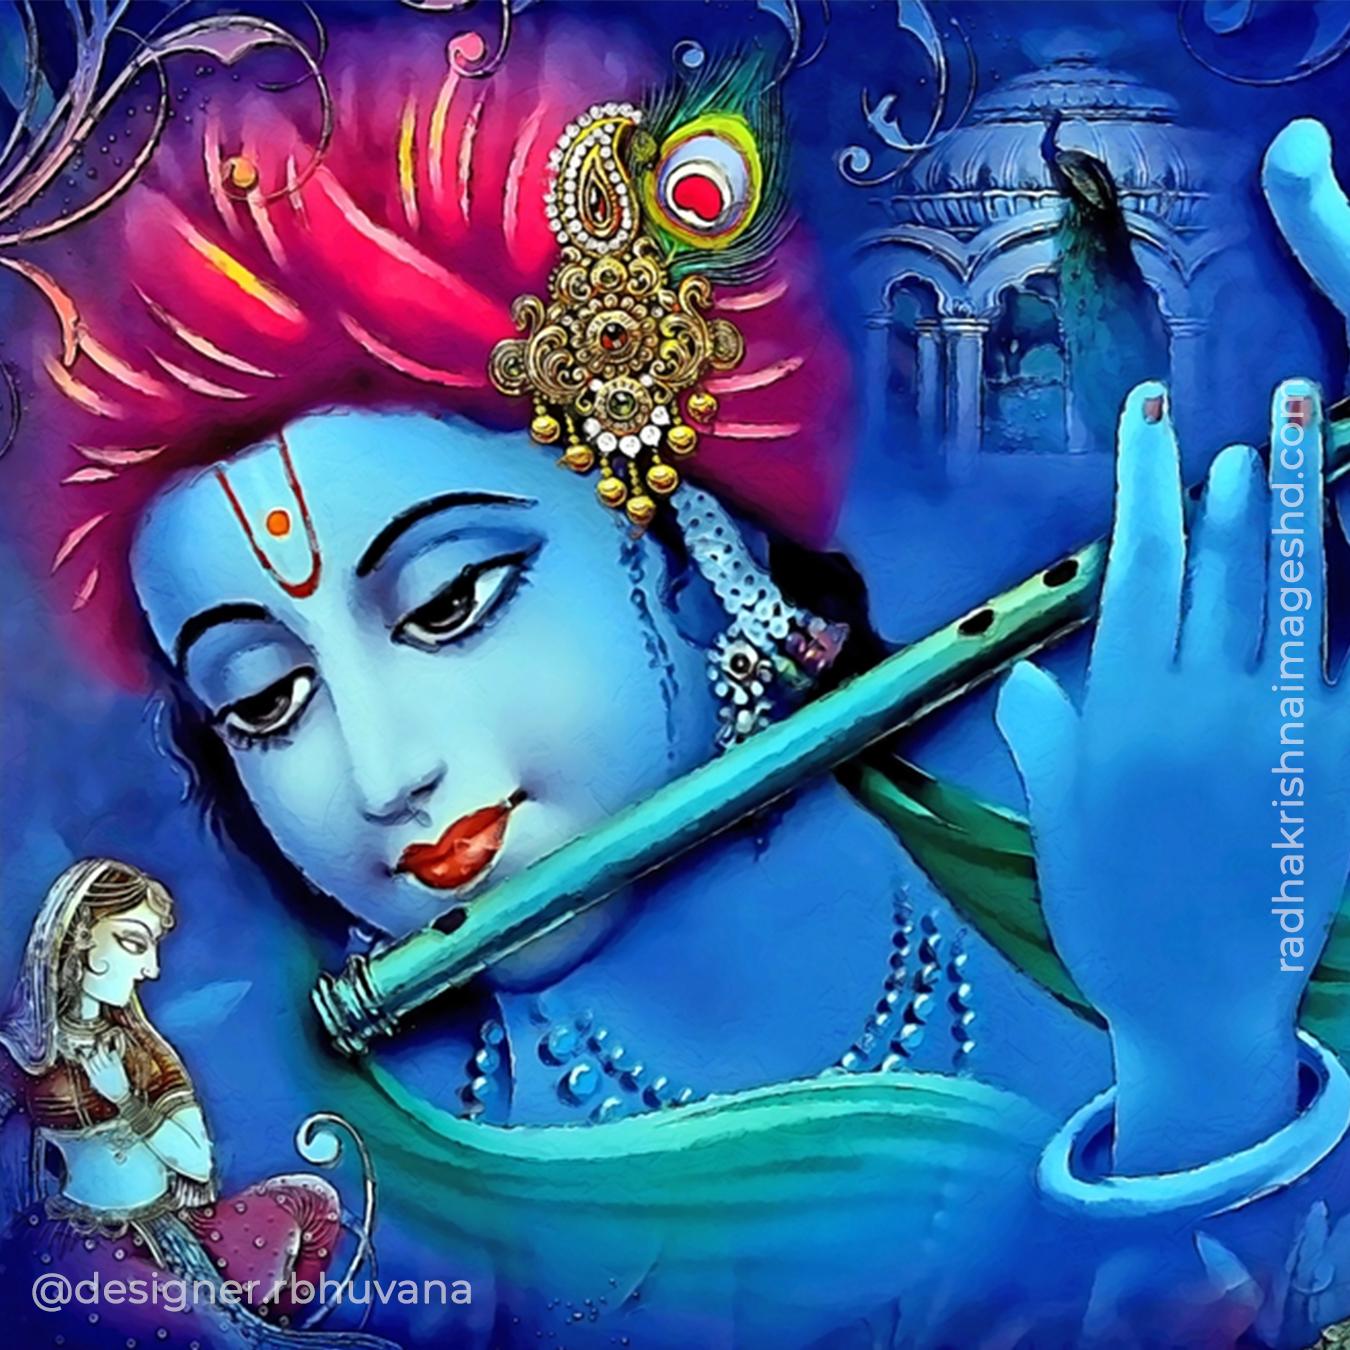 45 Best Krishna With Flute HD Wallpapers For Free Download - 200+ Radha  Krishna HD Images